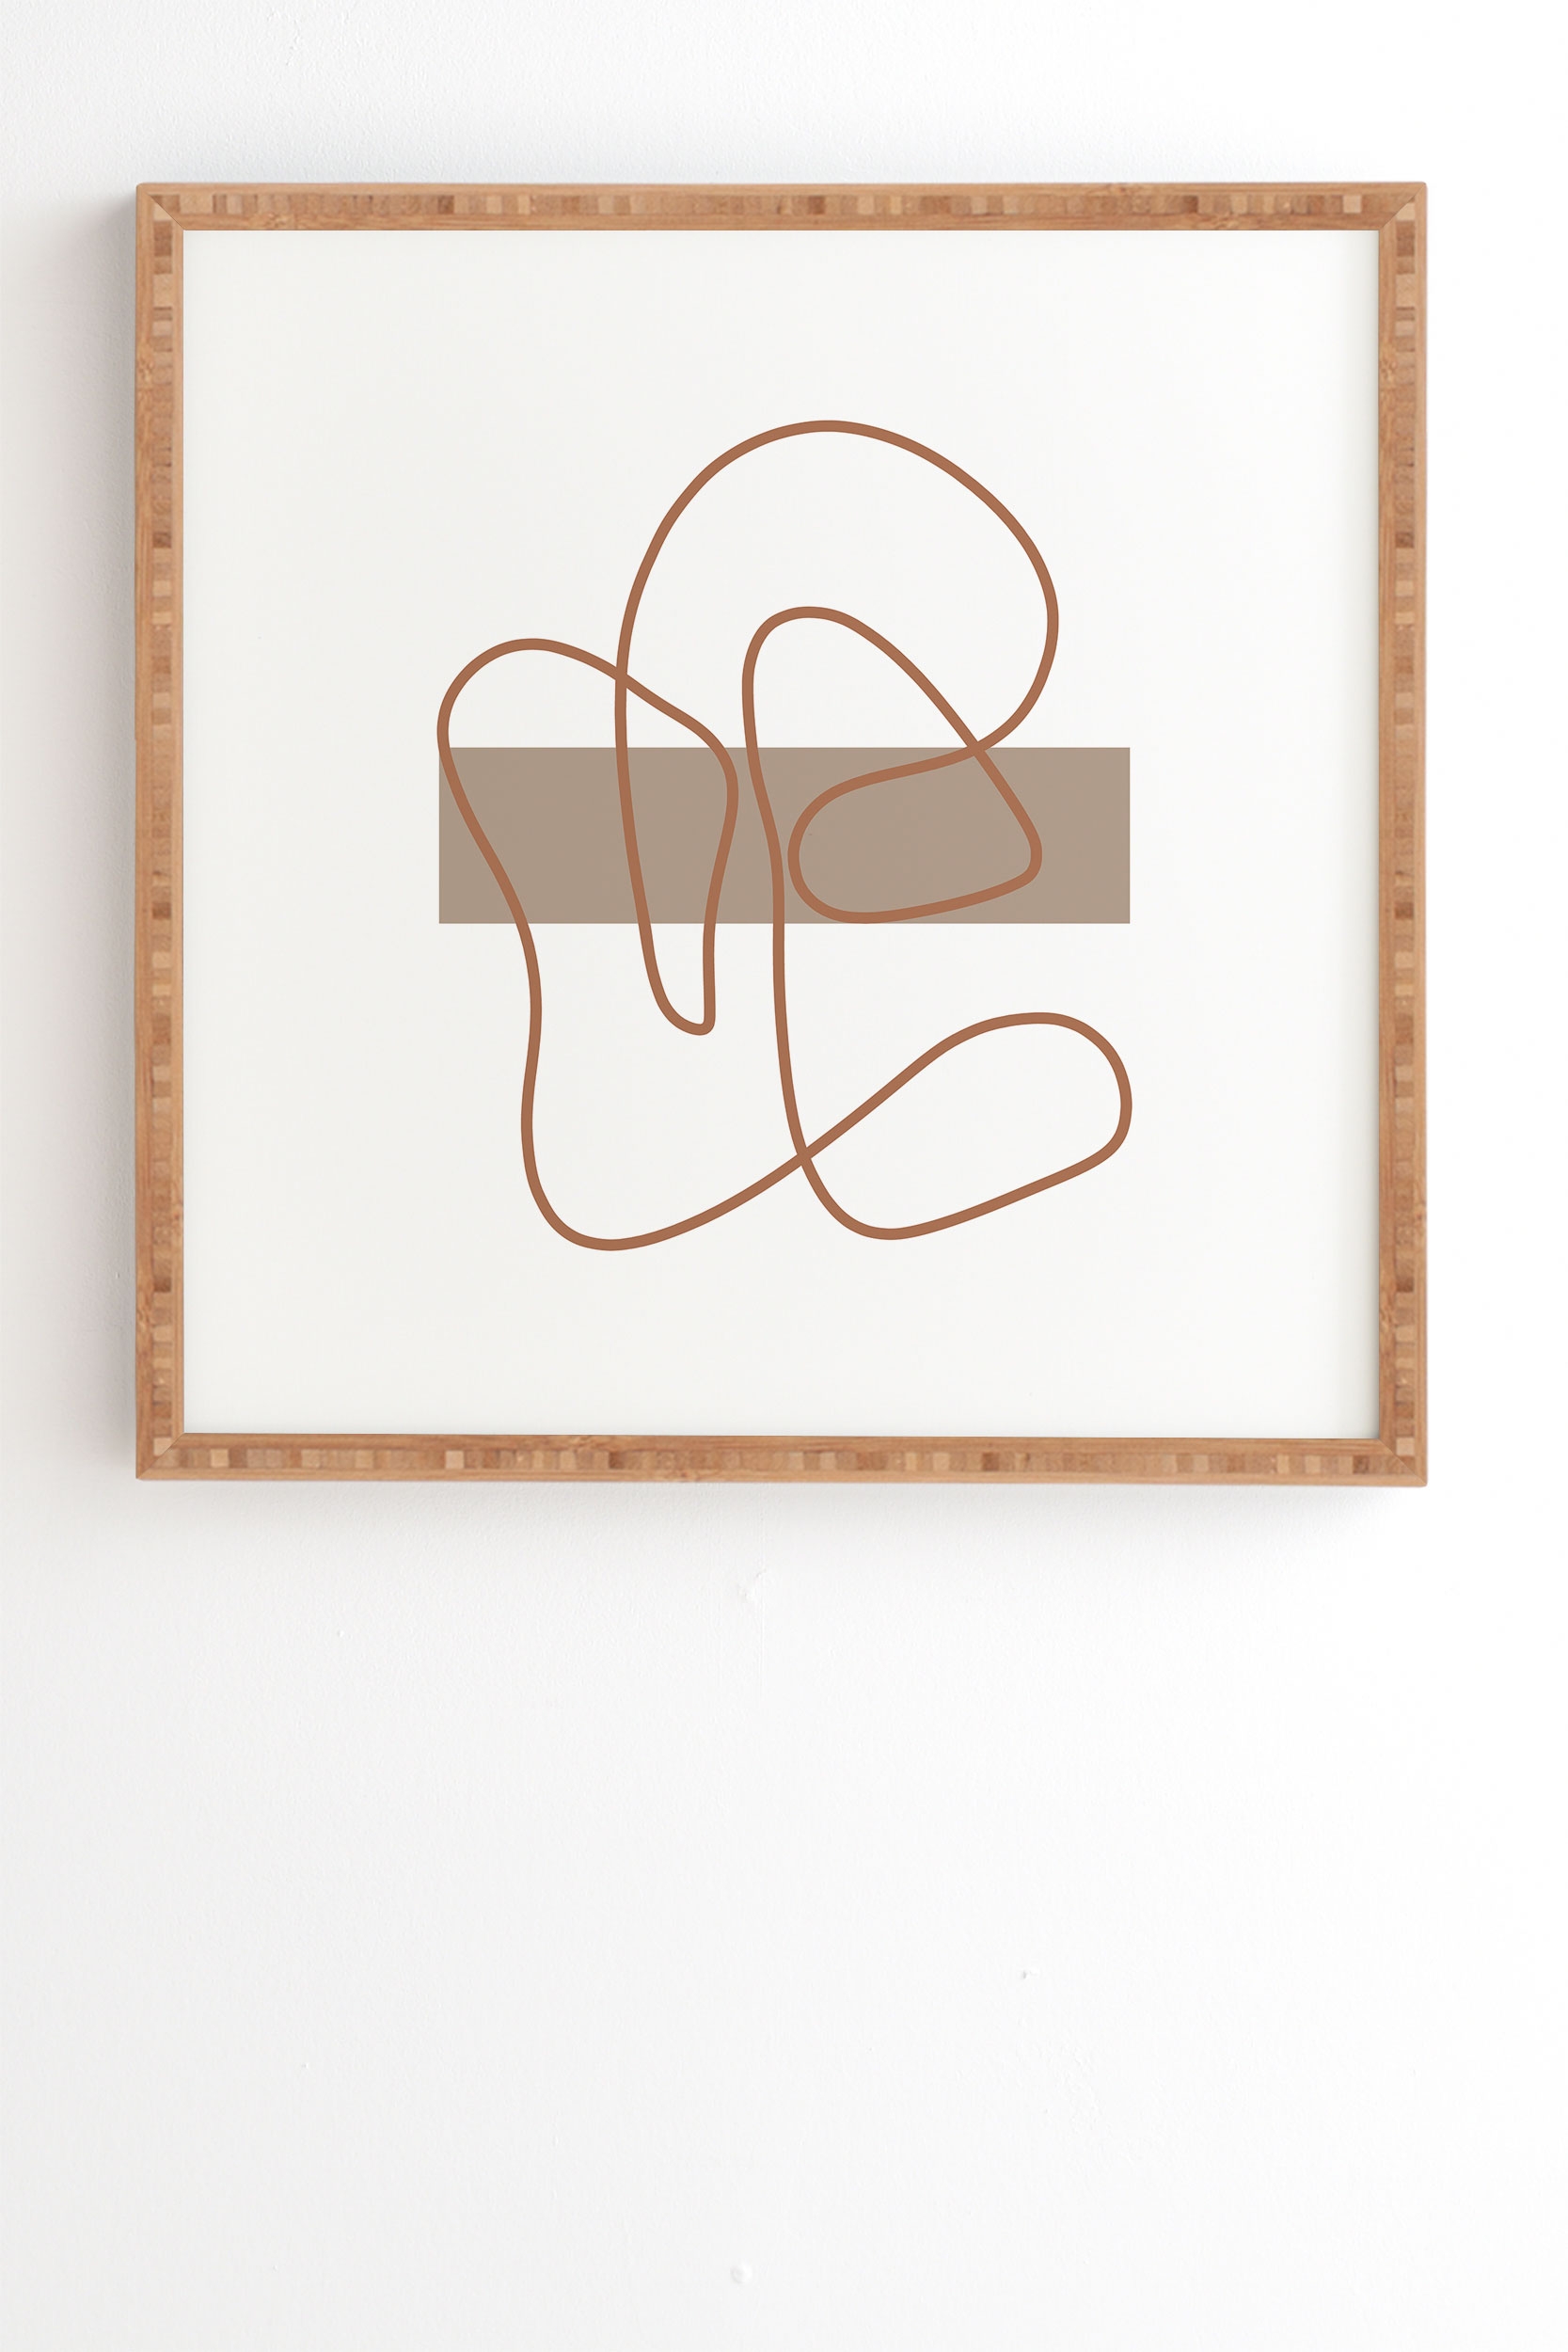 Abstract Line Neutral by Mambo Art Studio - Framed Wall Art Bamboo 8" x 9.5" - Image 1